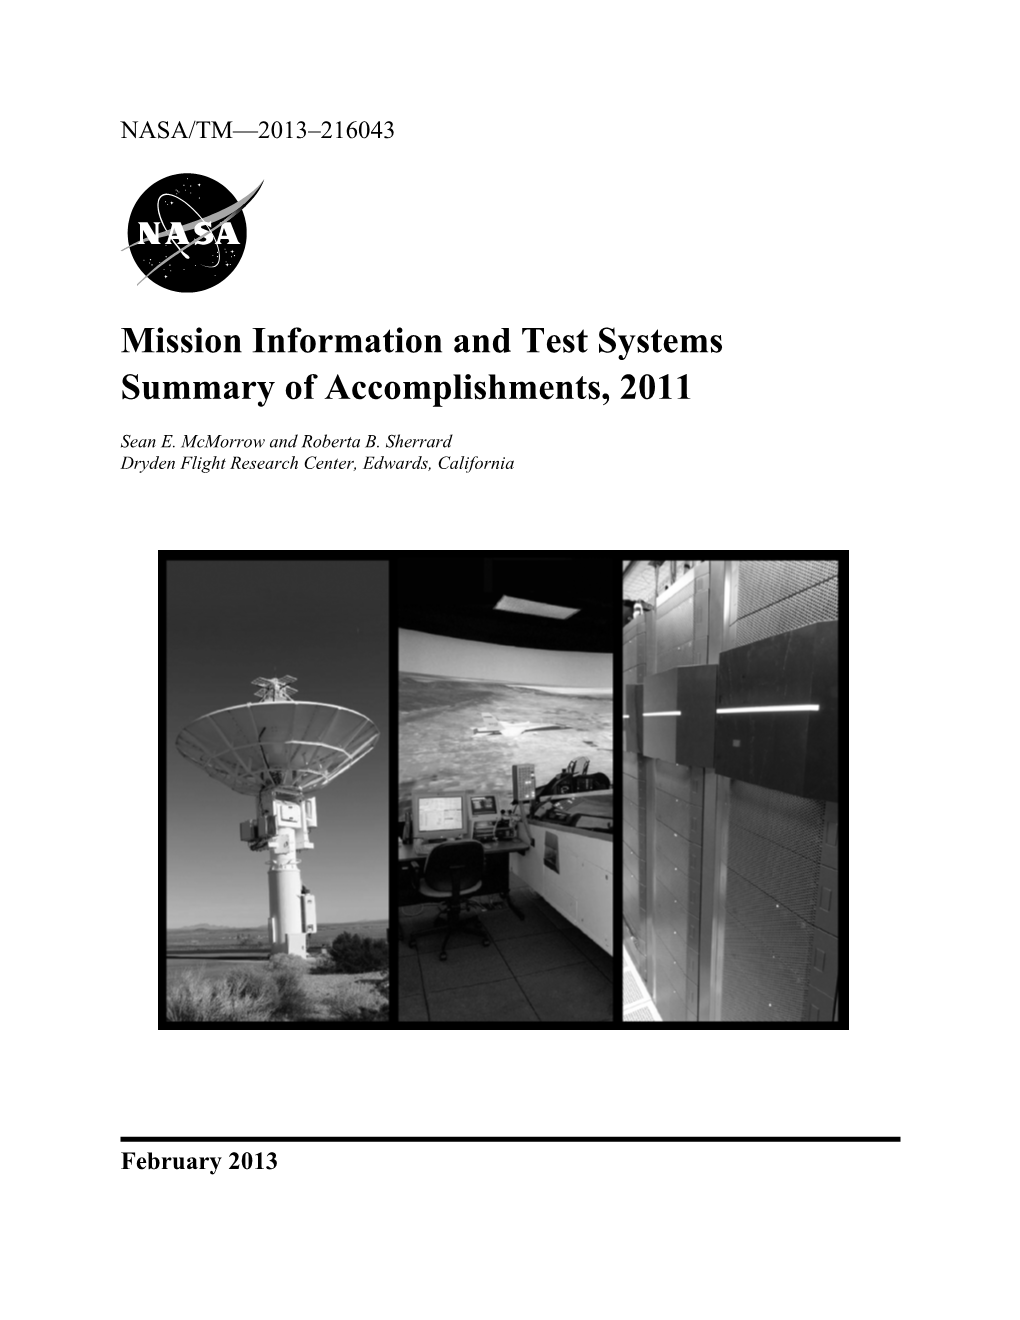 Mission Information and Test Systems Summary of Accomplishments, 2011